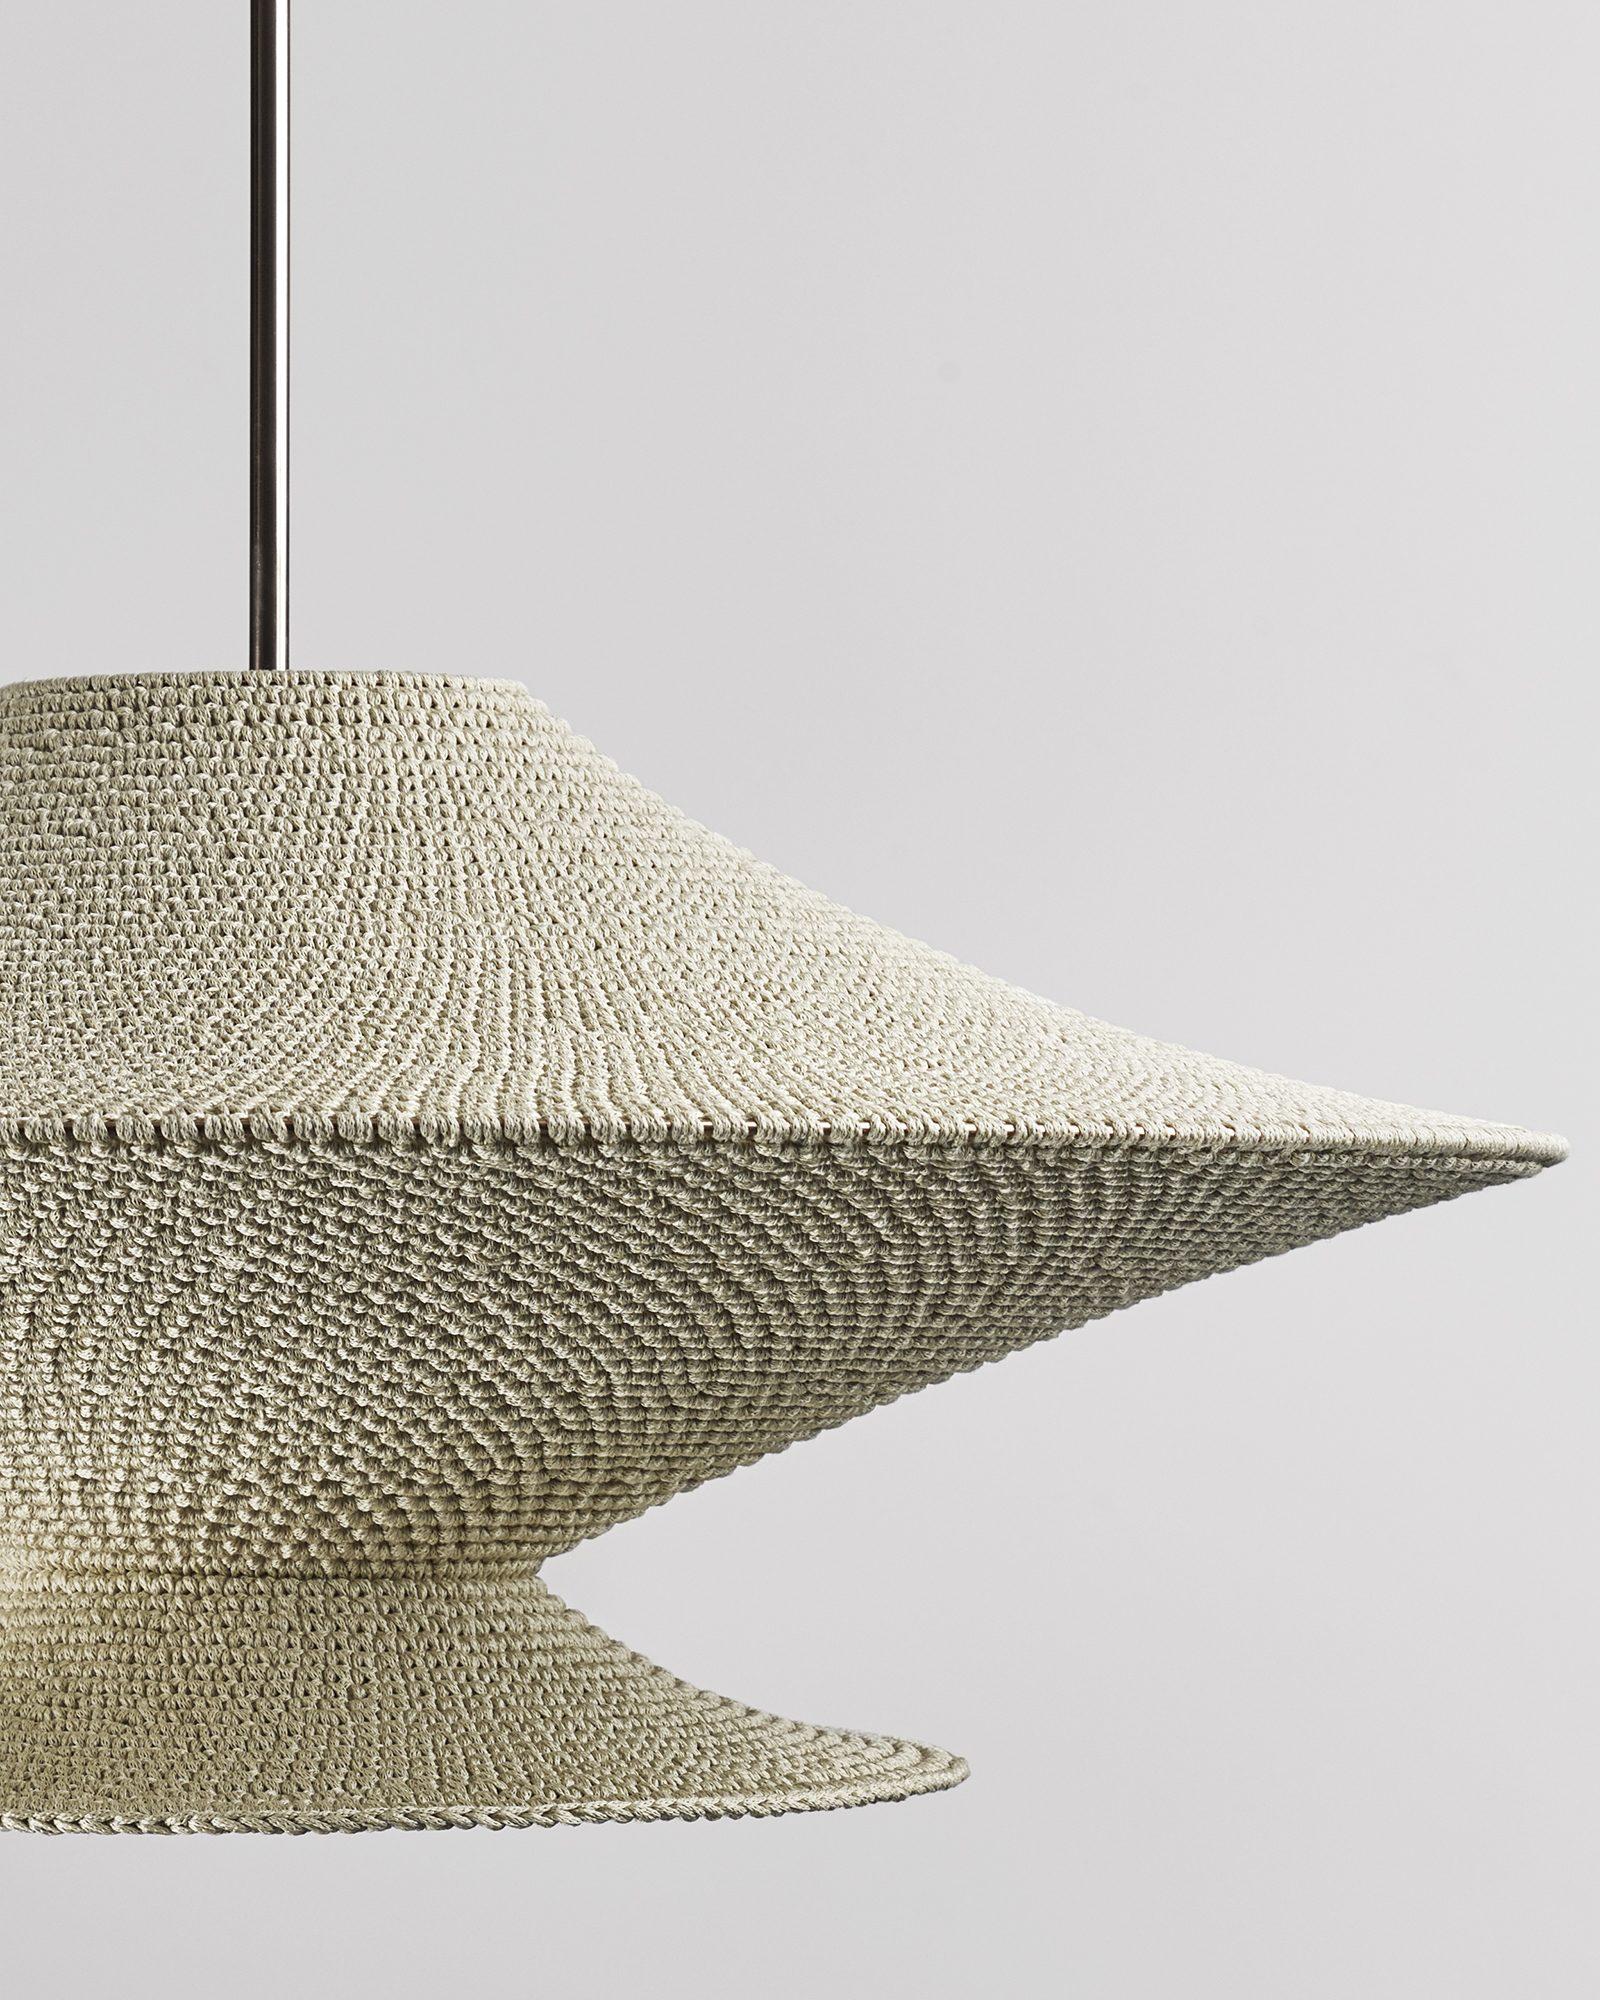 Post-Modern Large Jupe Solitaire Pendant Lamp by Naomi Paul